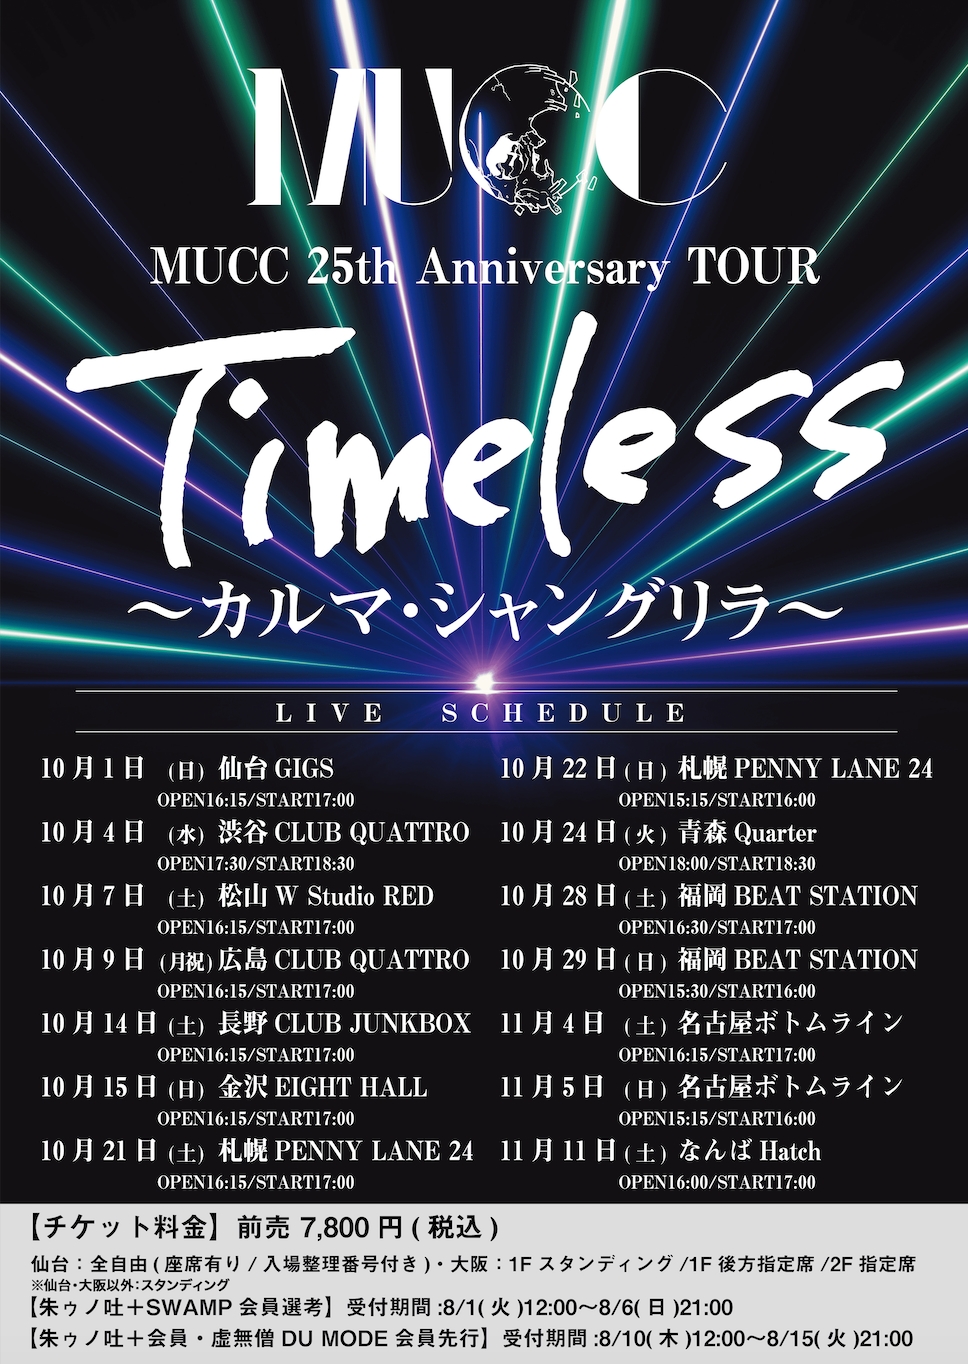 MUCC 25th Anniversary TOUR「Timeless」〜カルマ・シャングリラ 